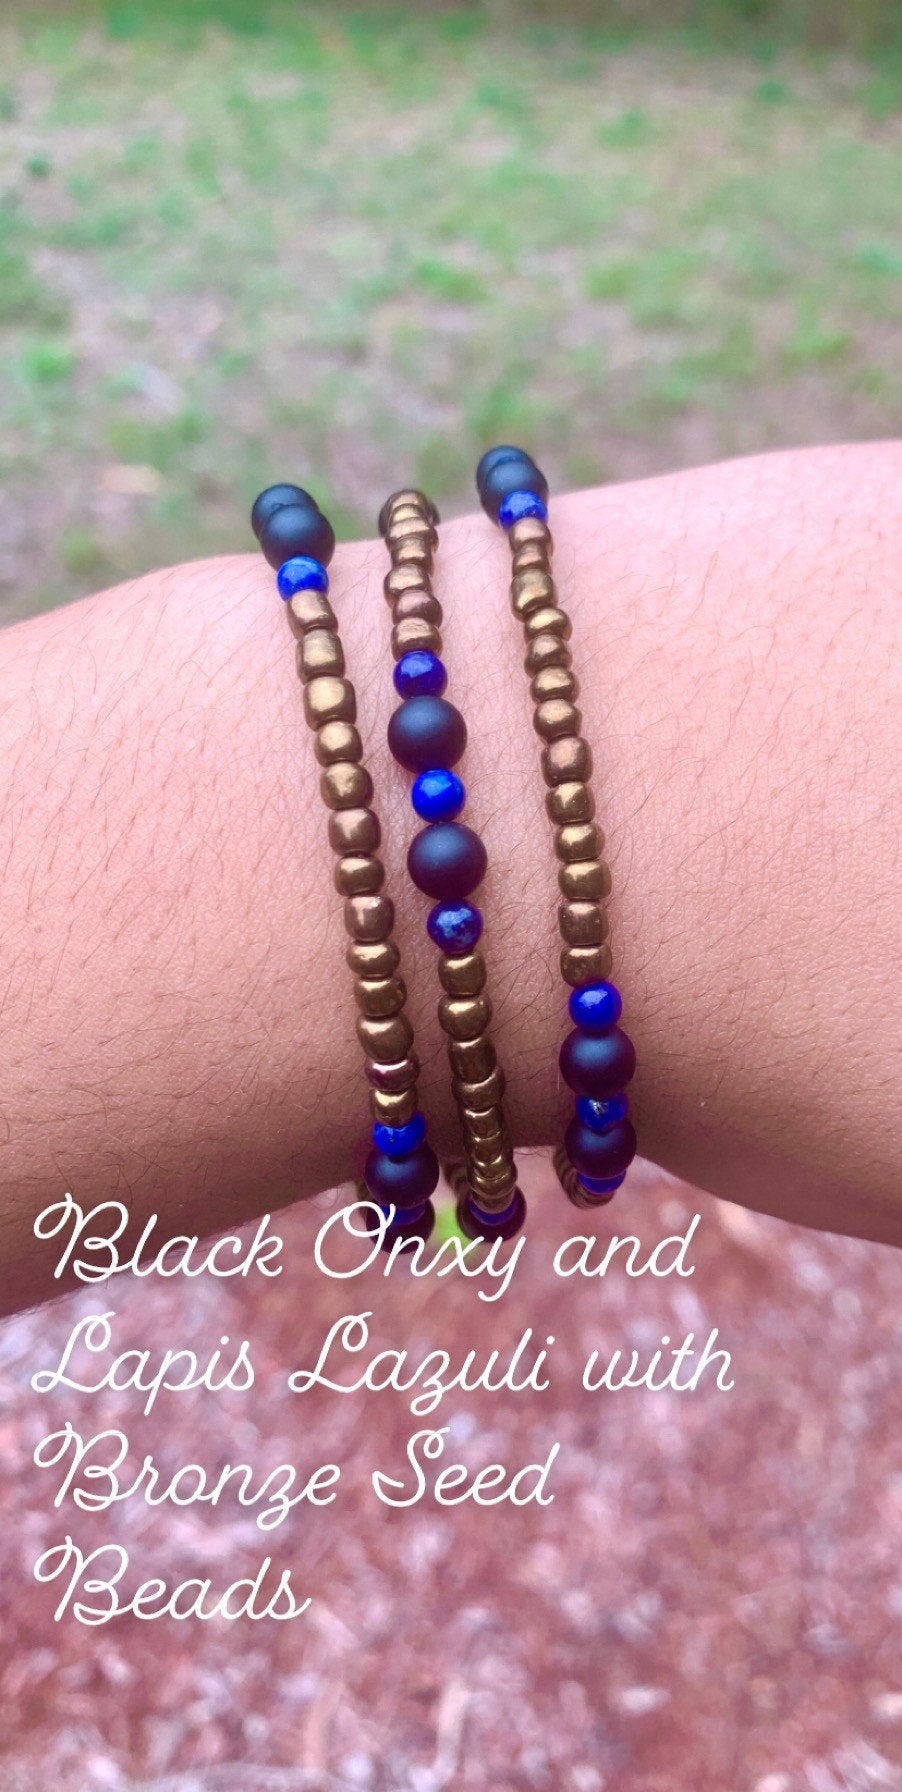 Gemstone Black Onxy, Lapis Lazuli, Rhodonite, or Hematite with Silver or Bronze Seed Beads Layered Bracelet Set For Women Genuine Crystals